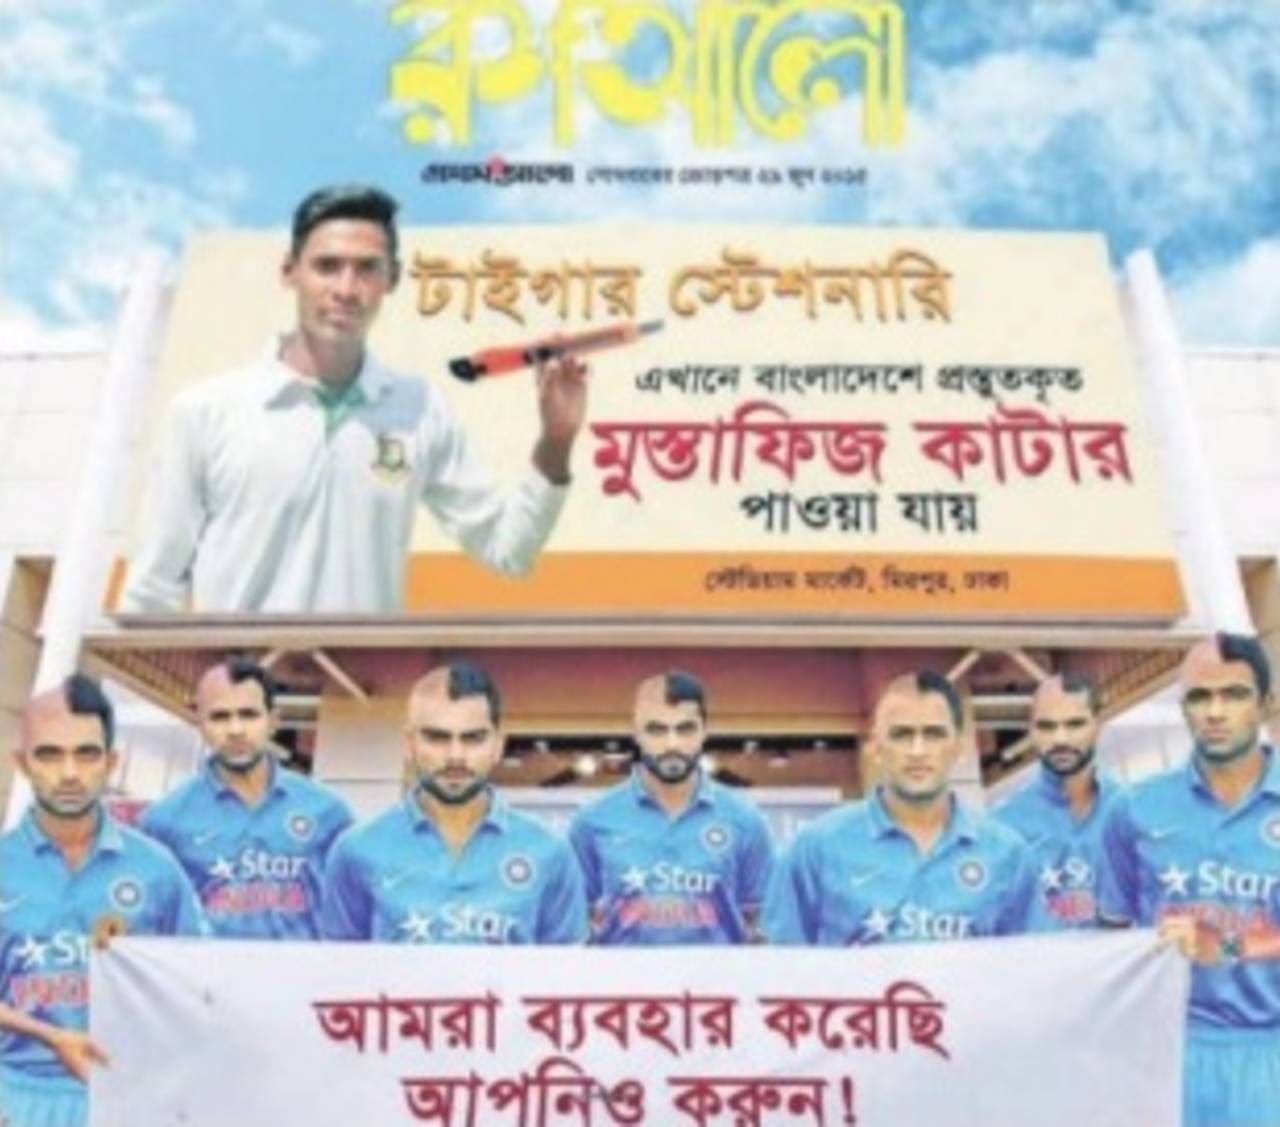 The latest advertisement in the India-Bangladesh off-field rivalry